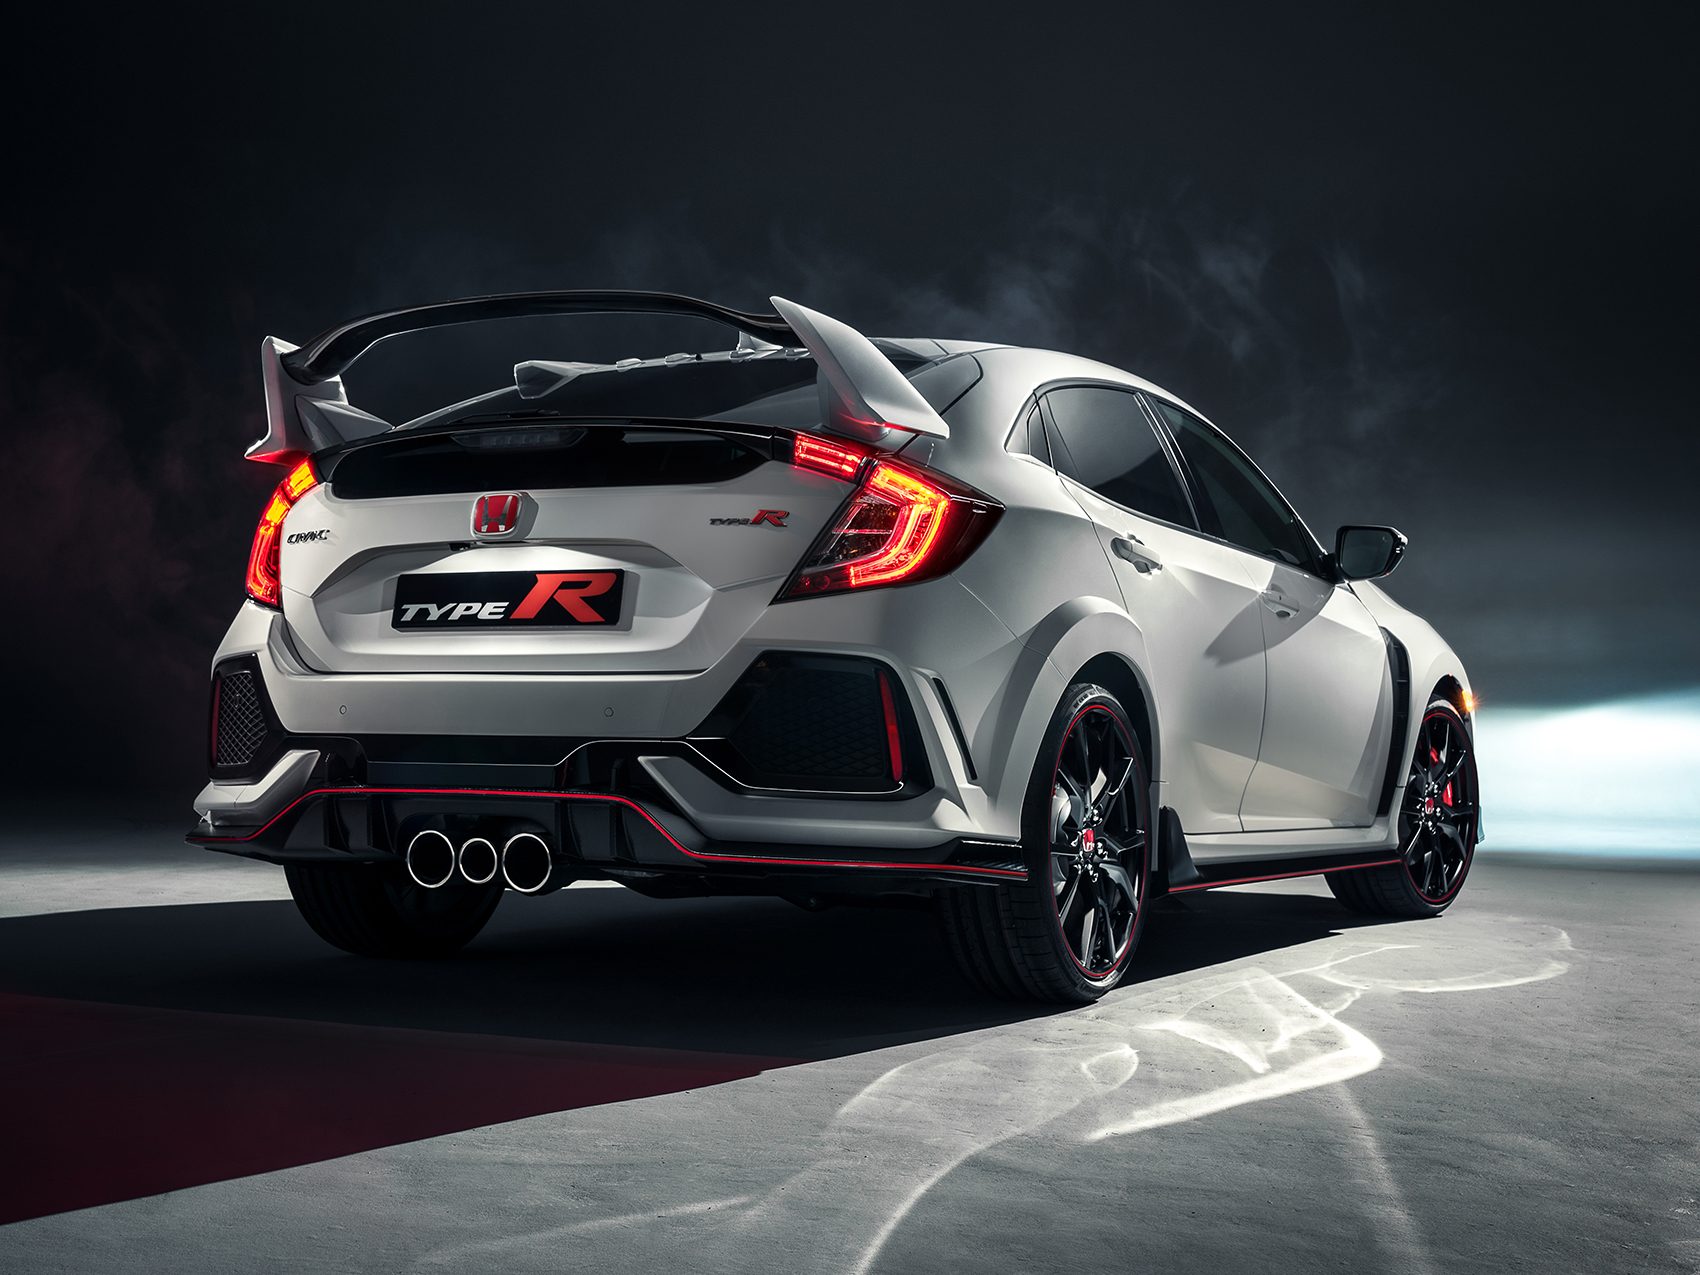 2017 Honda Civic Type R The fastest, most powerful Honda ever sold in